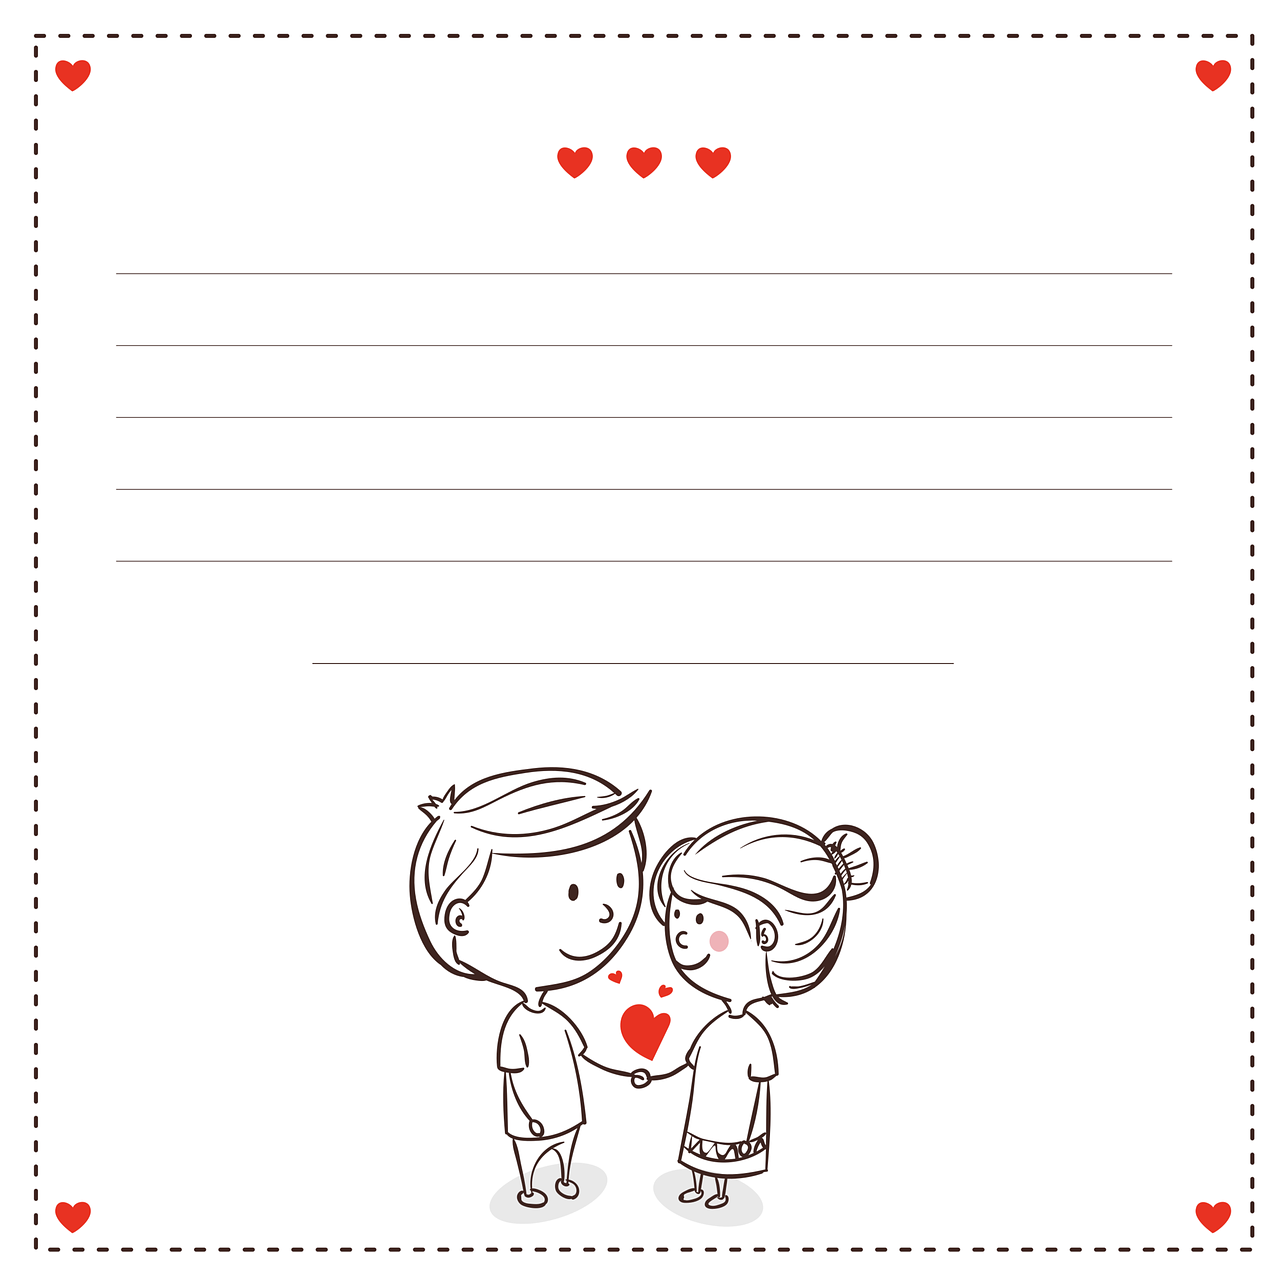 a couple of people standing next to each other, romanticism, template sheet, awww, text, child